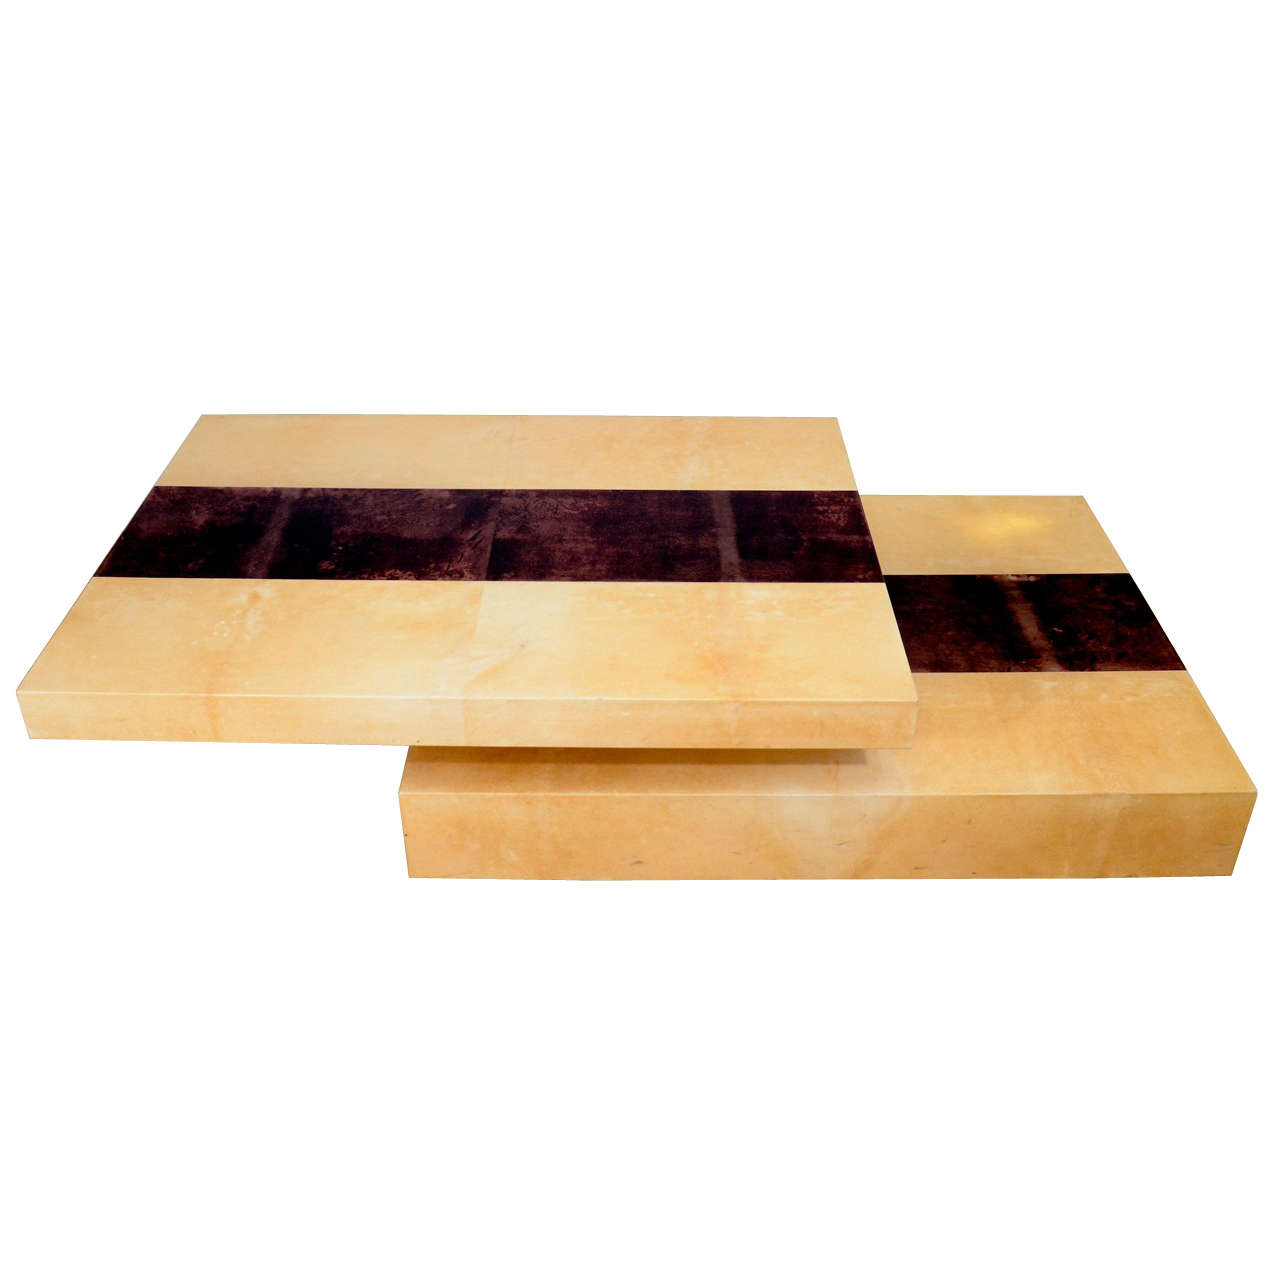 An Aldo Tura  Striped Lacquered Parchment Sliding Coffee Table.